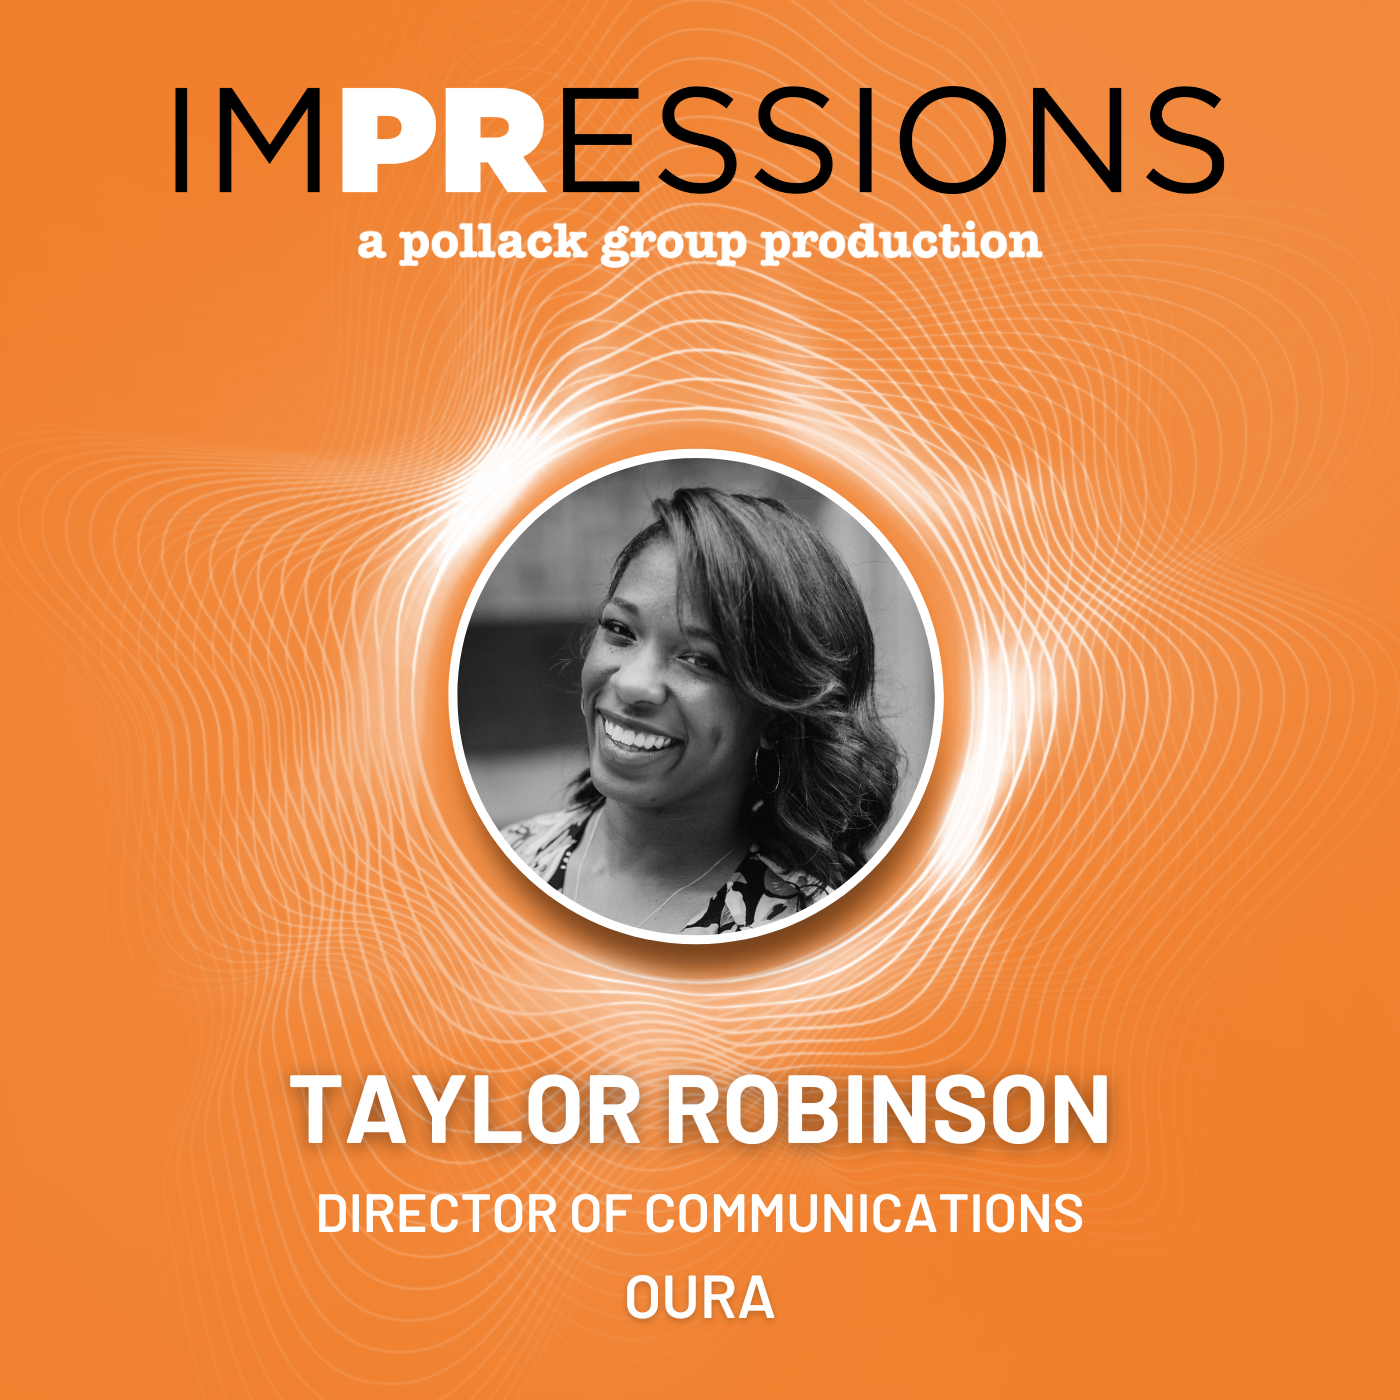 Promotional graphic with smiling woman for Impressions by the Pollack Group.